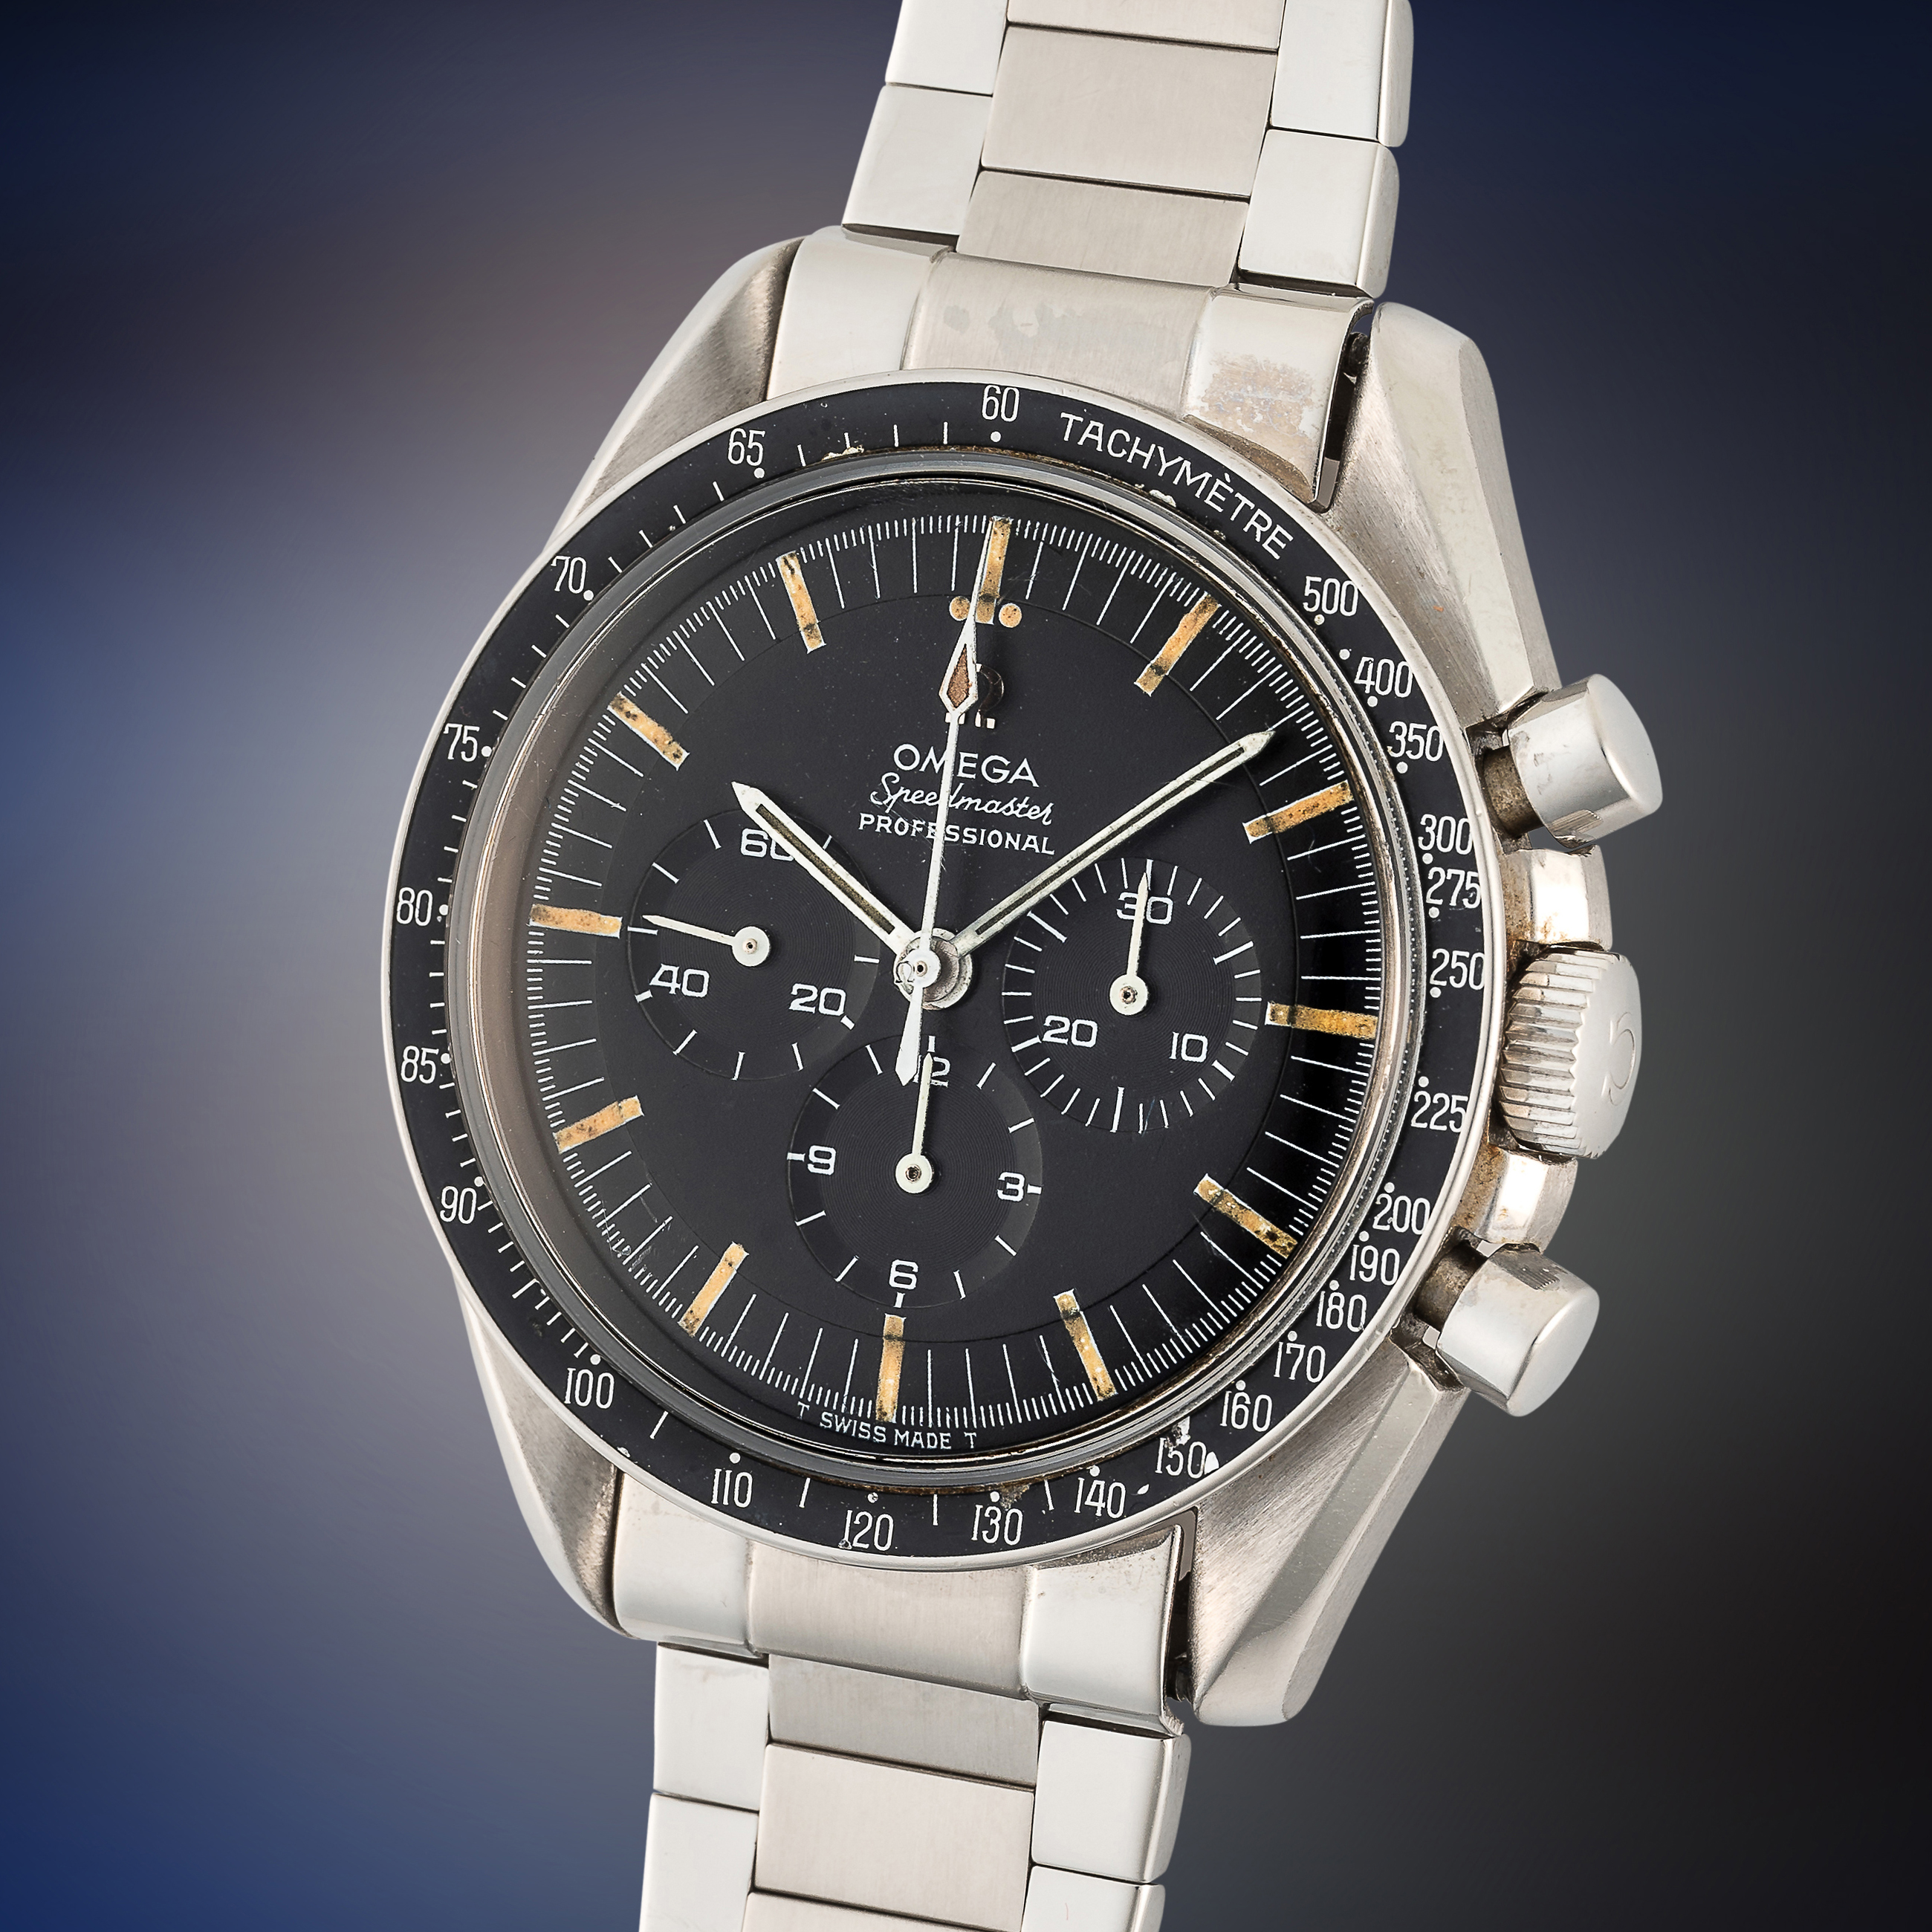 A GENTLEMAN'S SIZE STAINLESS STEEL OMEGA SPEEDMASTER PROFESSIONAL "PRE MOON" CHRONOGRAPH WRIST WATCH